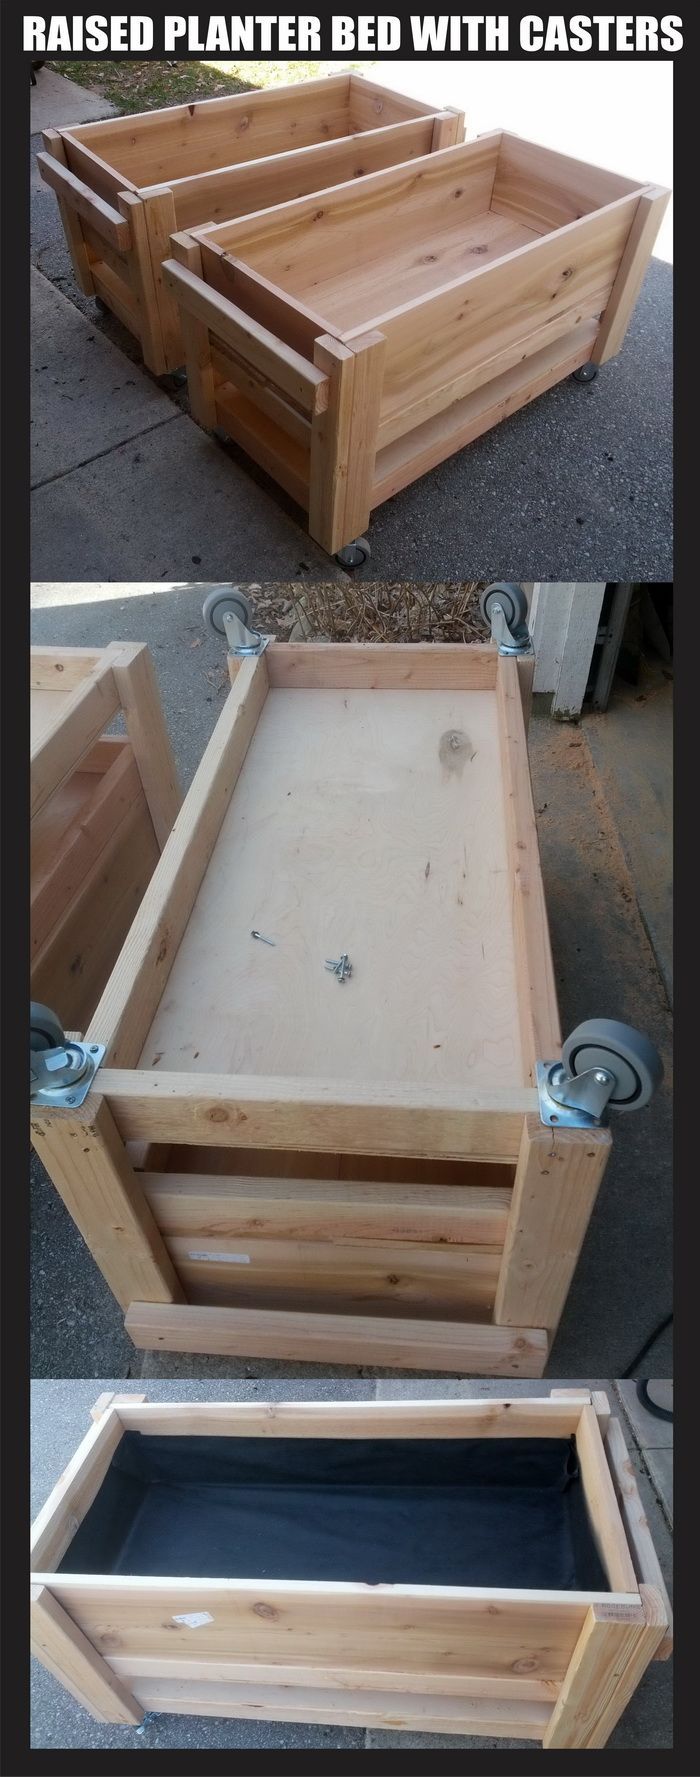 Raised garden planter boxes on wheels / casters – Size is 2 x 4 each, just over 2ft 4″ tall with the casters installed on the